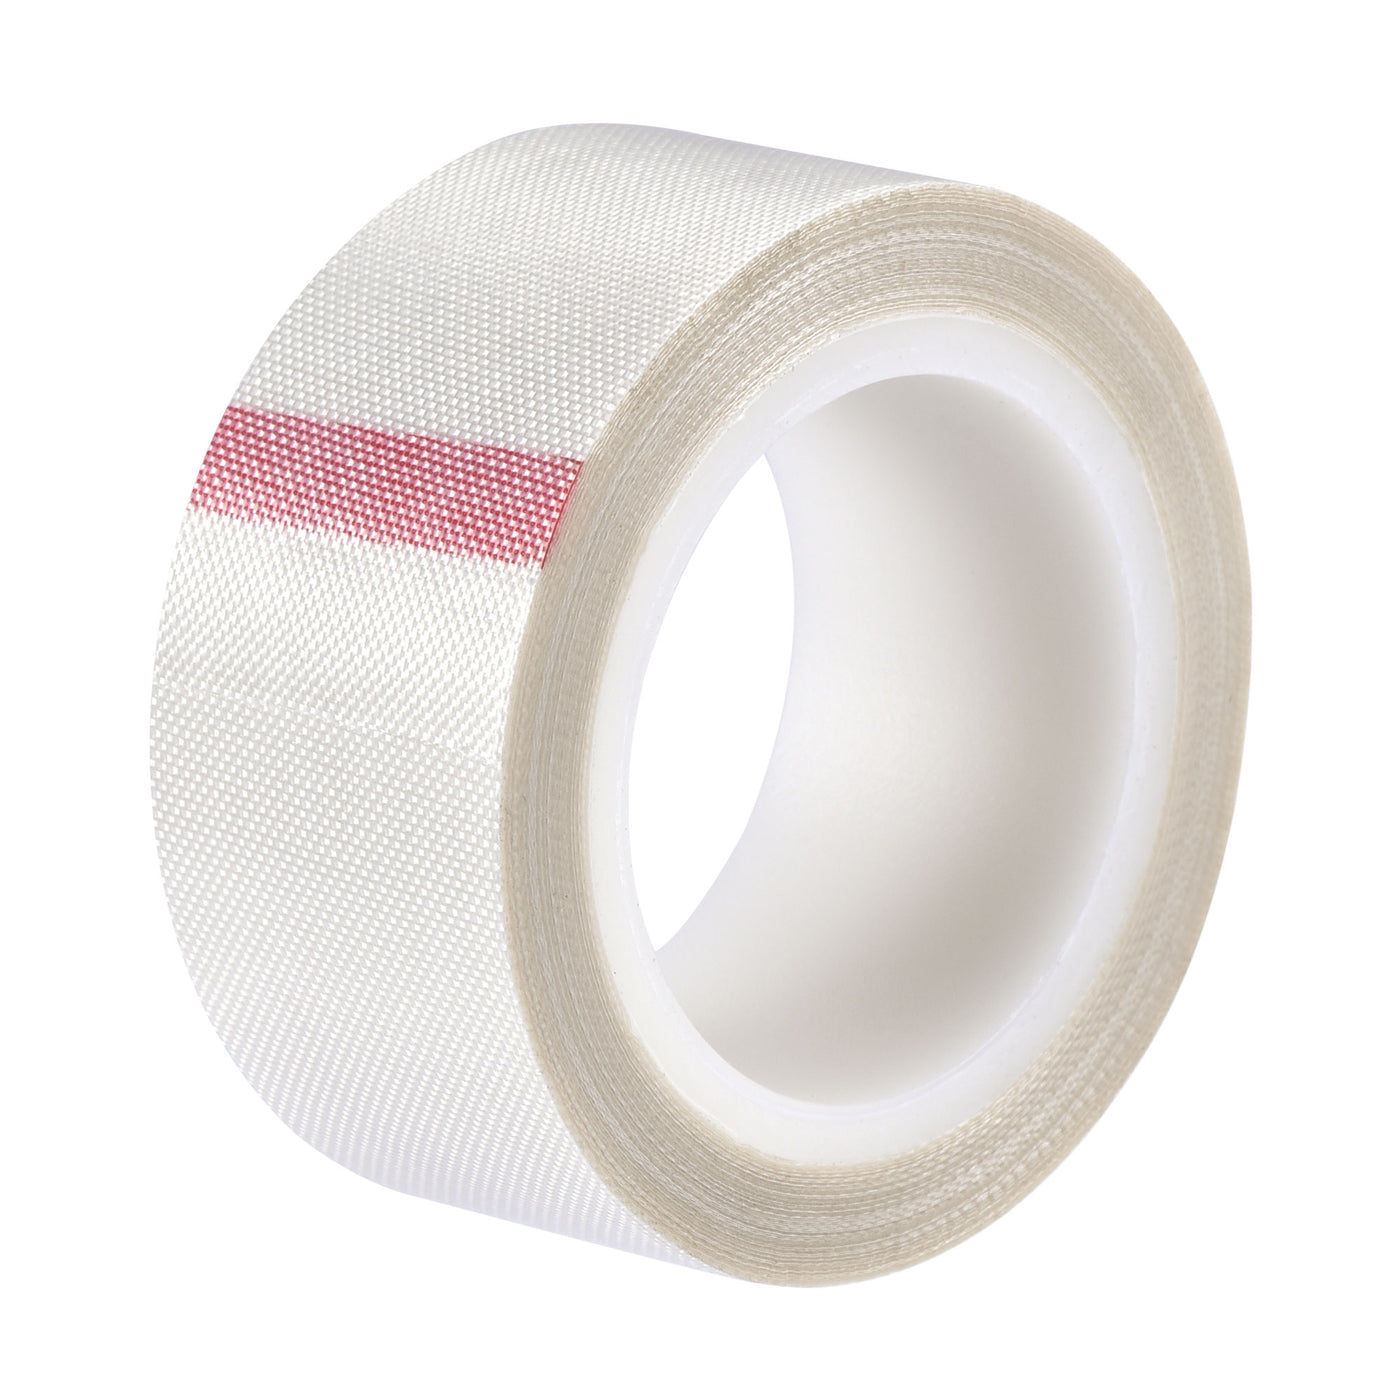 Heat Resistant Tape Polyimide Film Adhesive Tape 45mm x 27m(88ft)